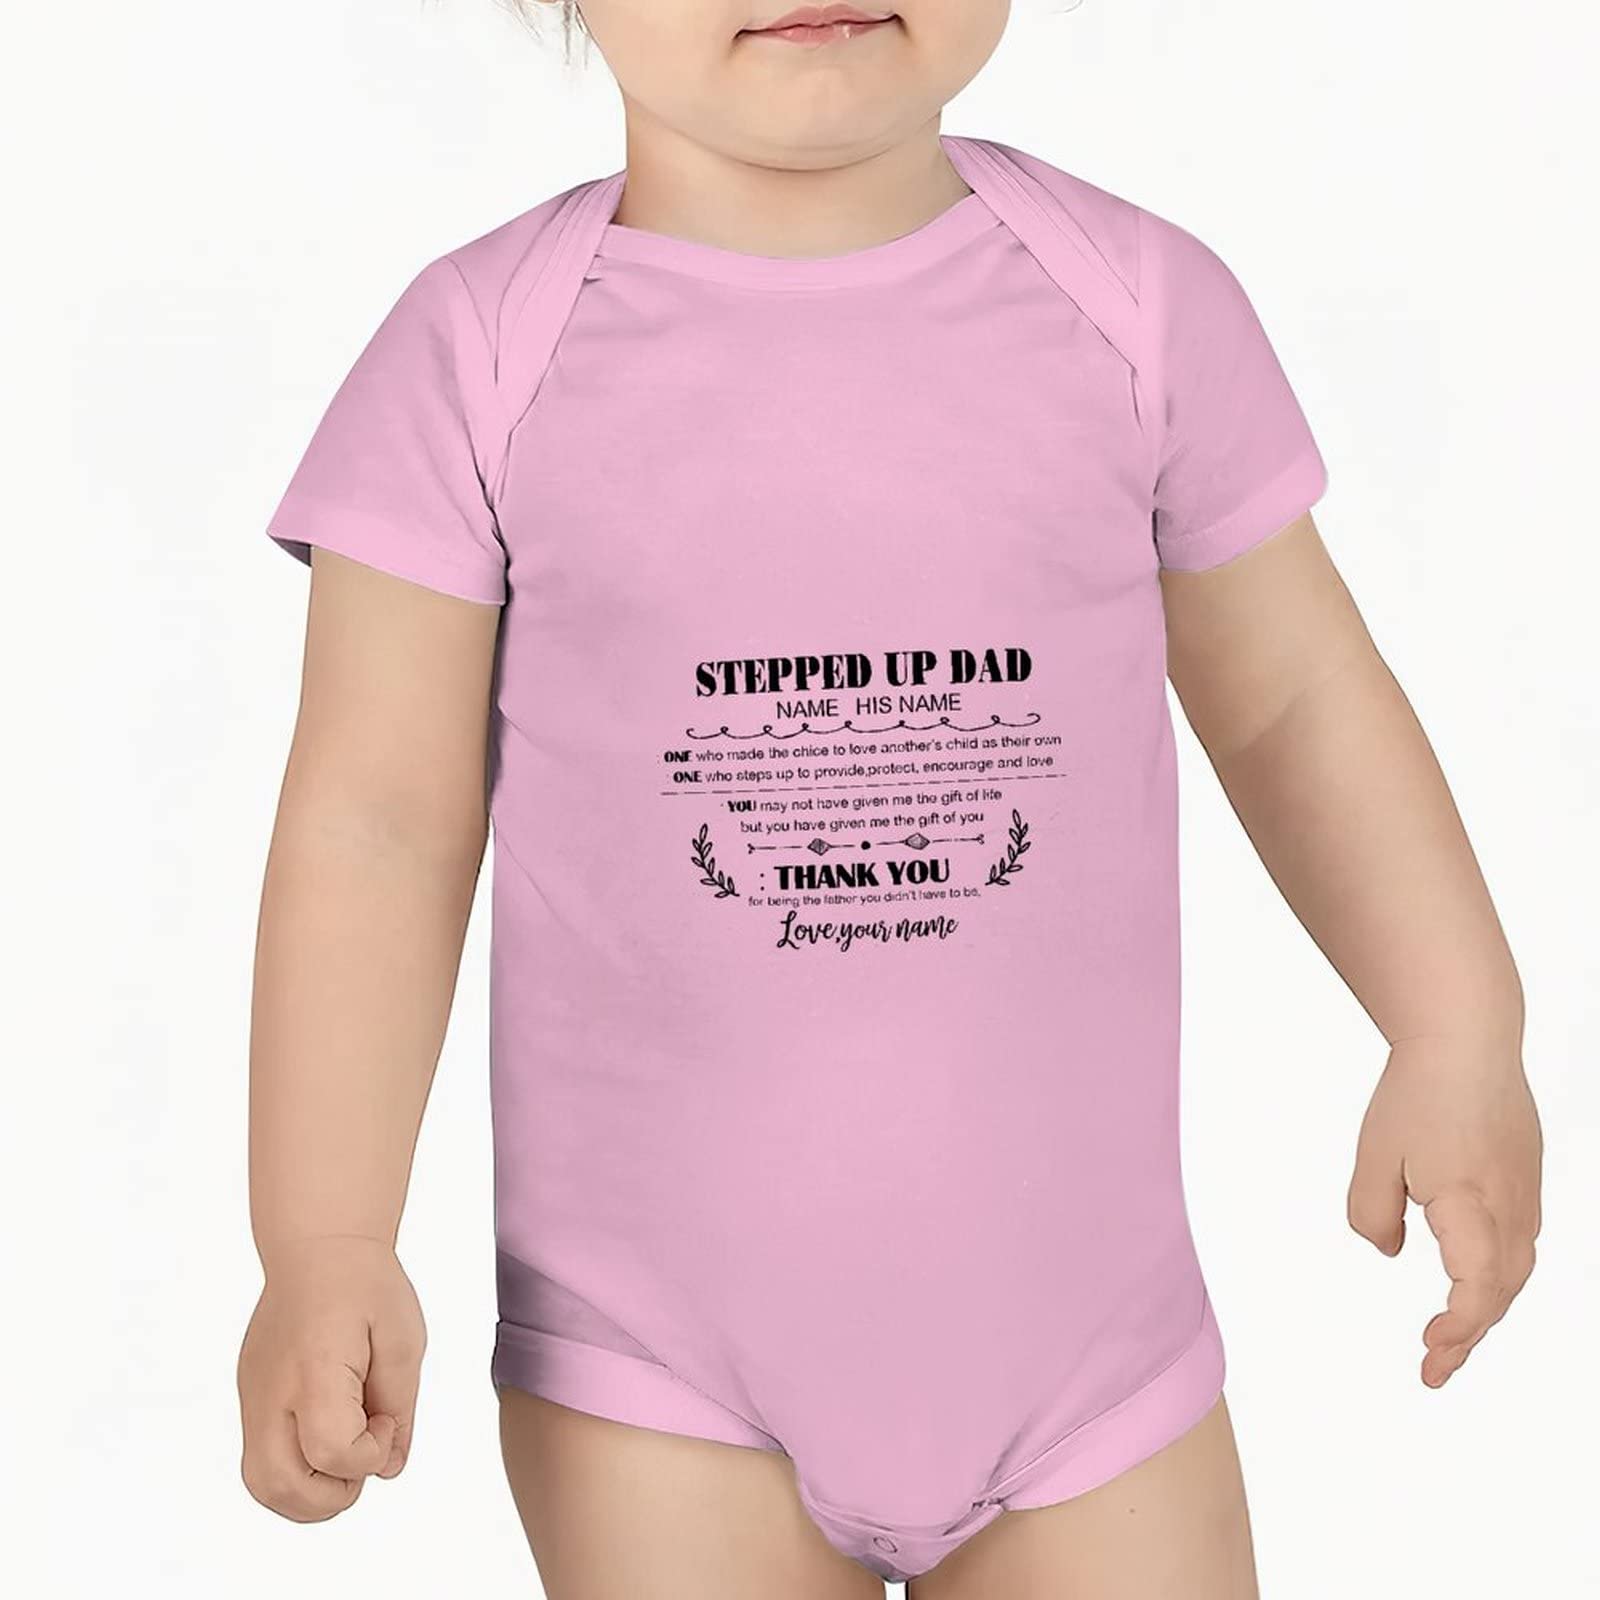 Baby Bodysuits Cotton Flexible Sleep And Play For Newborn Baby Pink Girl Infant One-Piece Short-Sleeve Gender Reveal Gifts